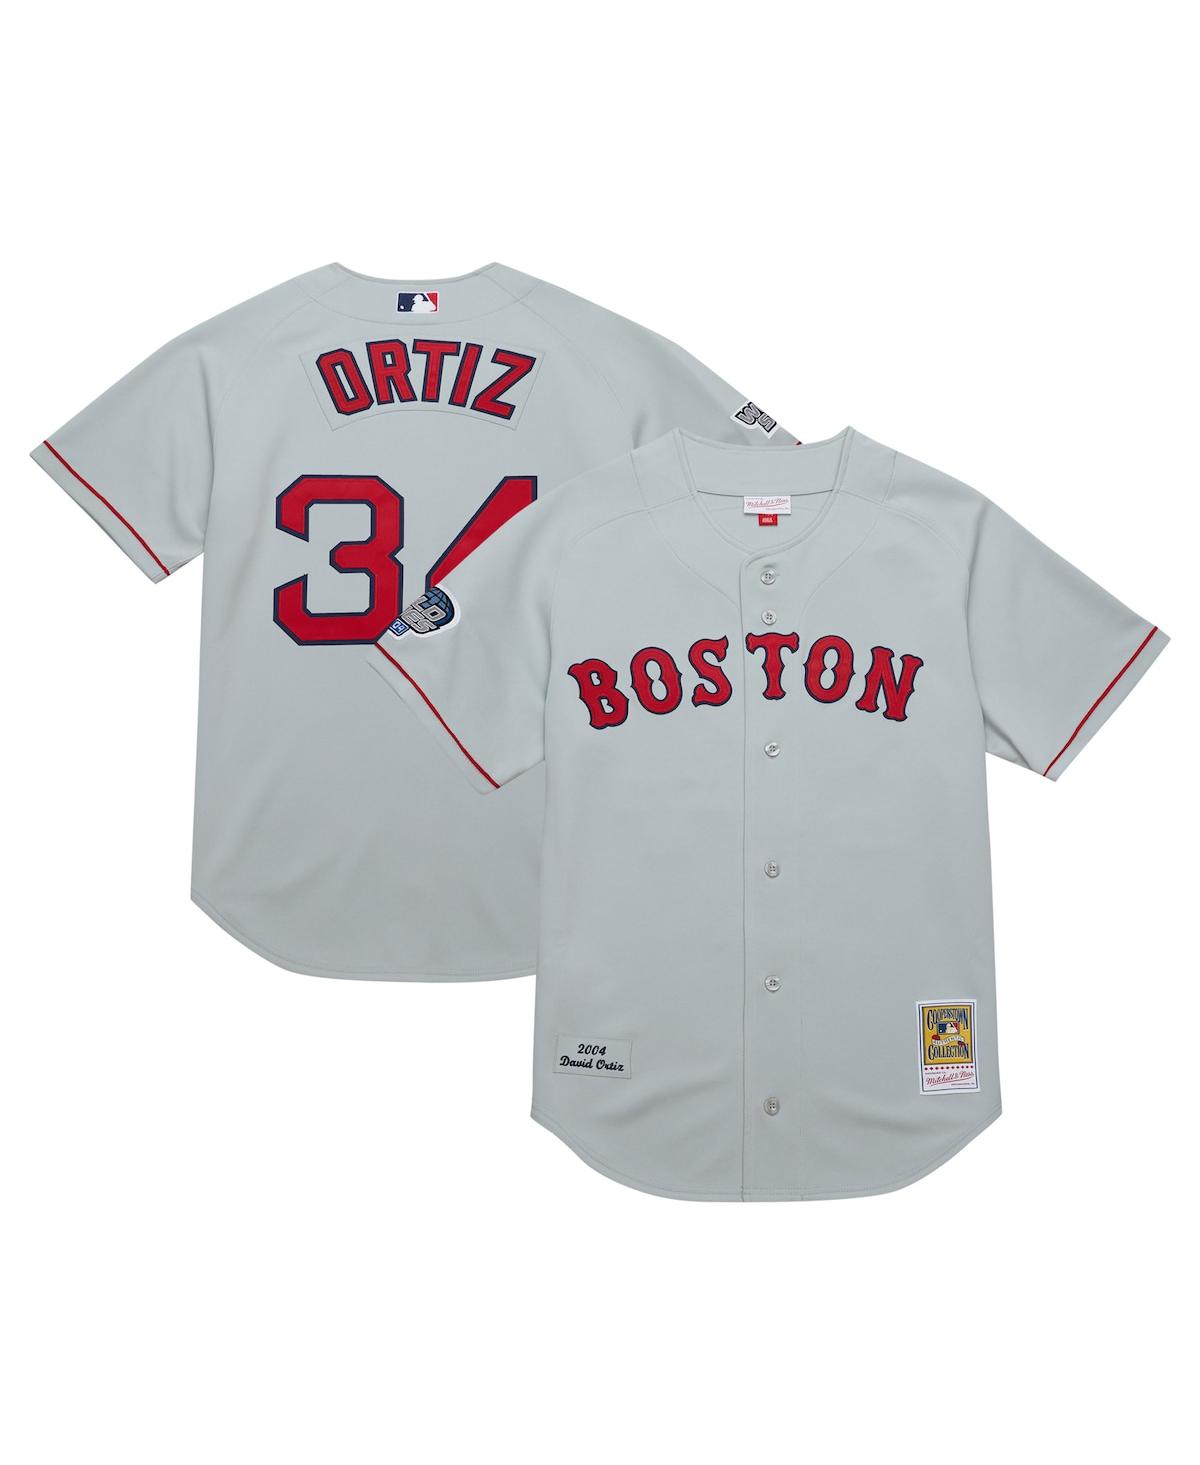 Mitchell Ness Men's David Ortiz Gray Boston Red Sox 2004 Cooperstown Collection Authentic Throwback Jersey - Gray